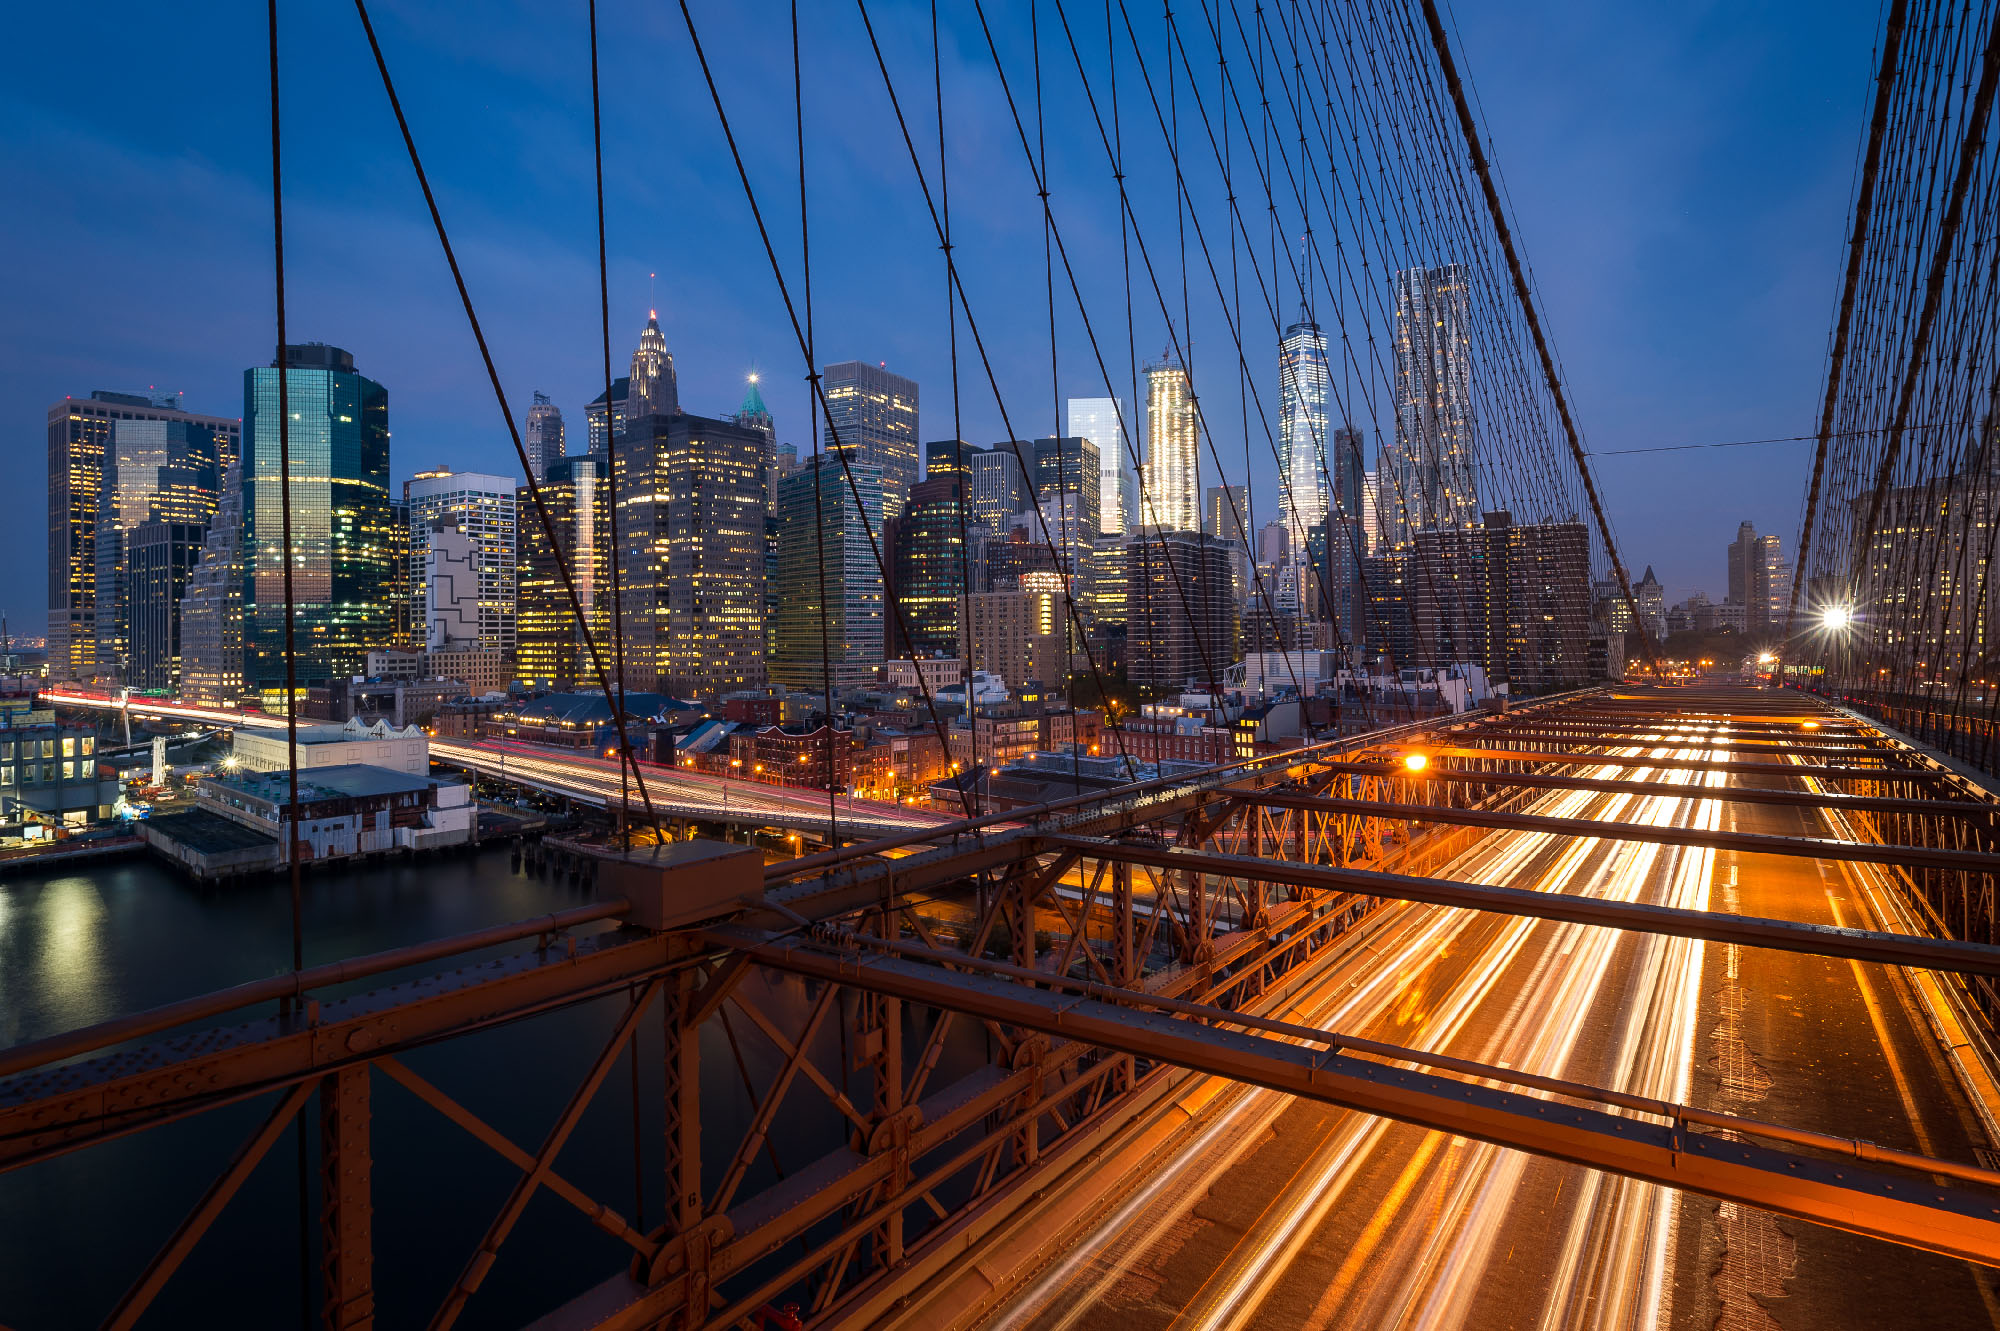 Traffic on the Brooklyn bridge with Lower Manhattan city skyline in the background